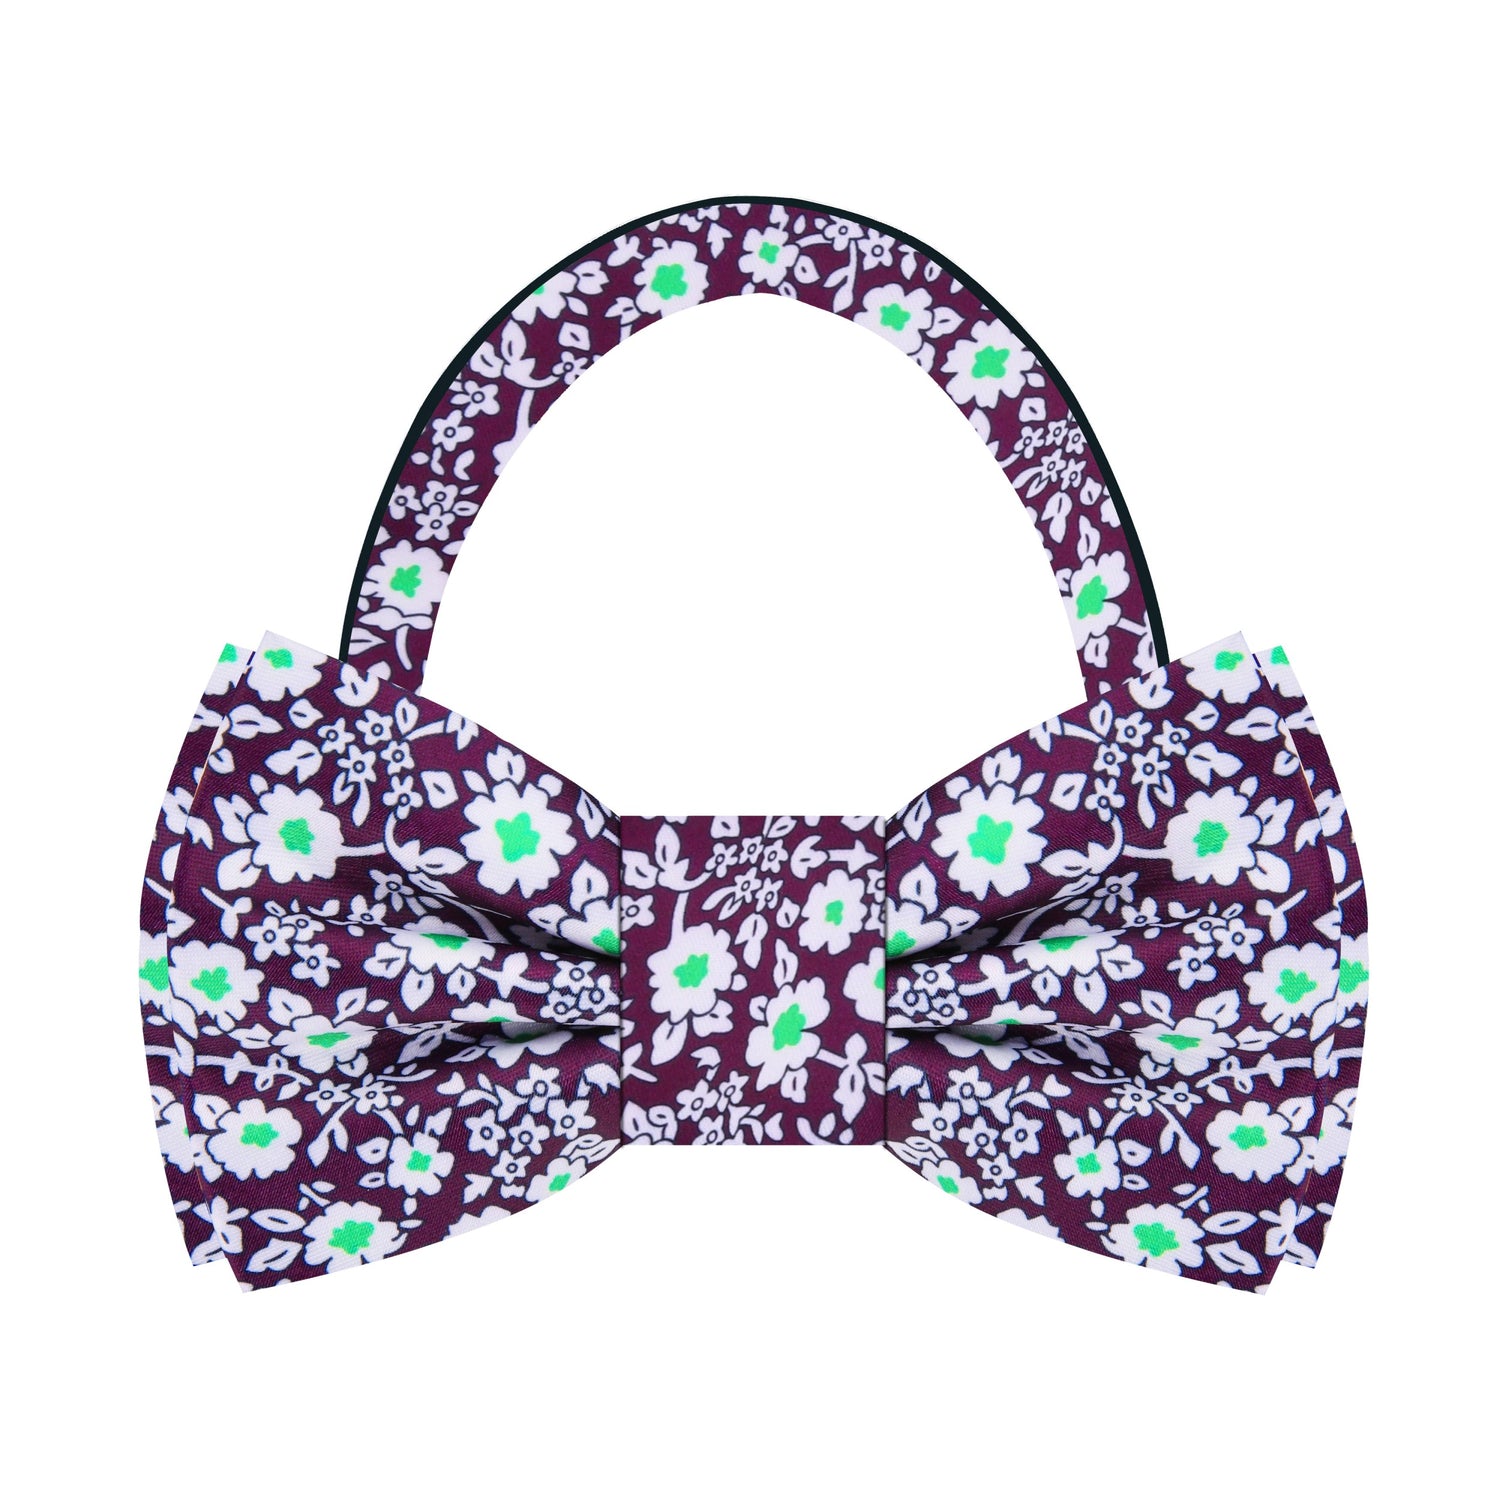 Deep Purple, White, Bright Green Small Flowers Bow Tie Pre Tied